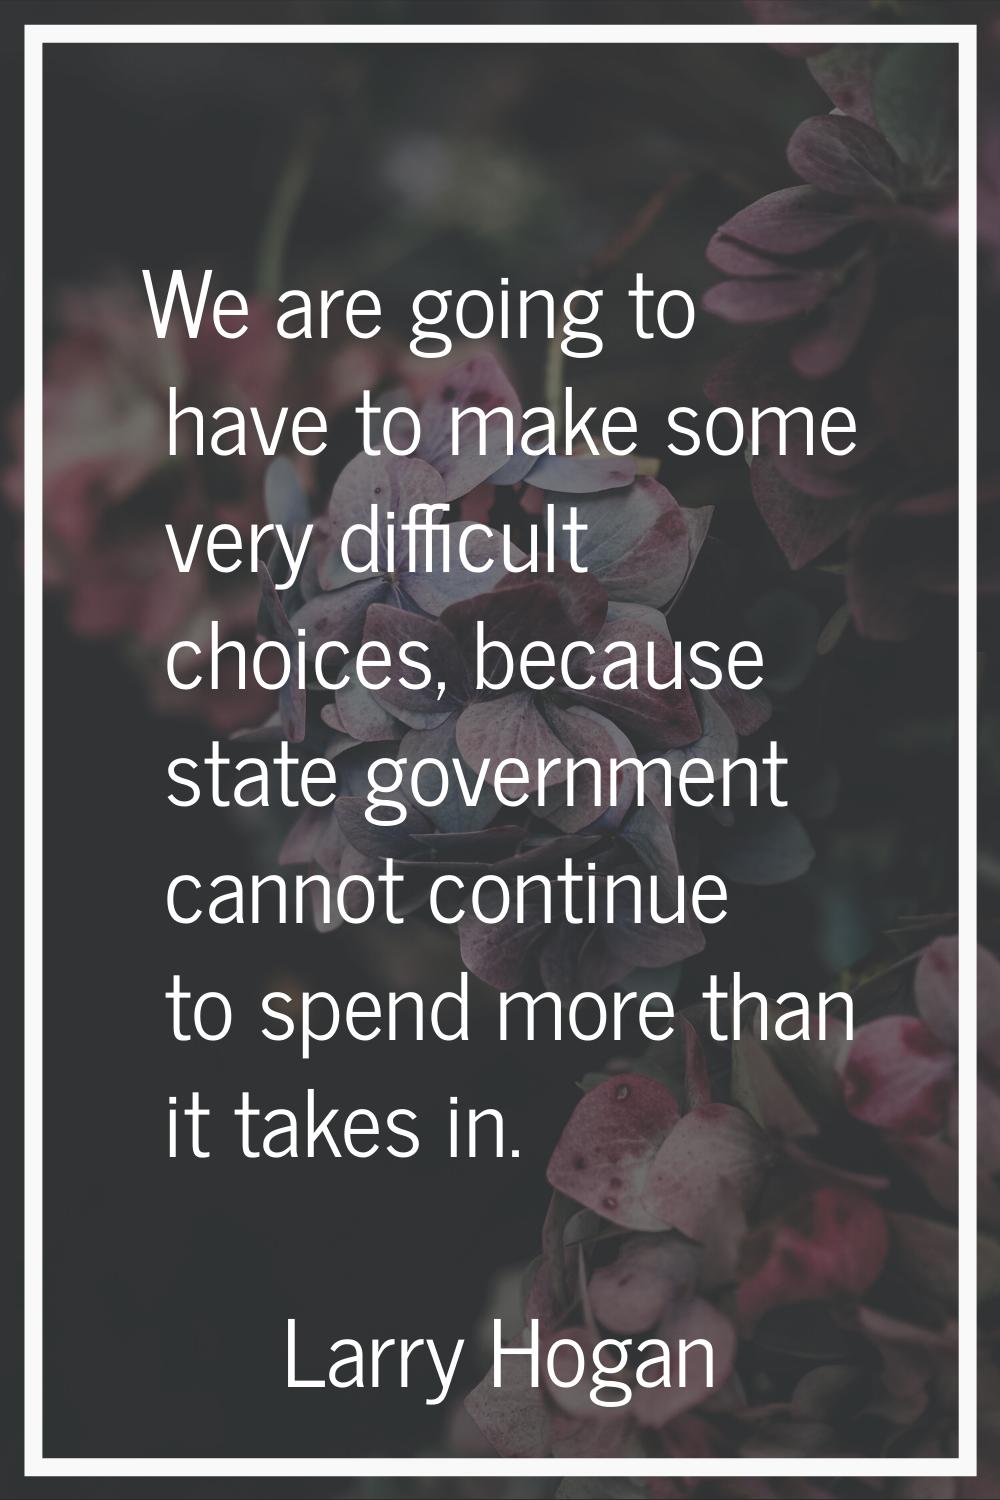 We are going to have to make some very difficult choices, because state government cannot continue 